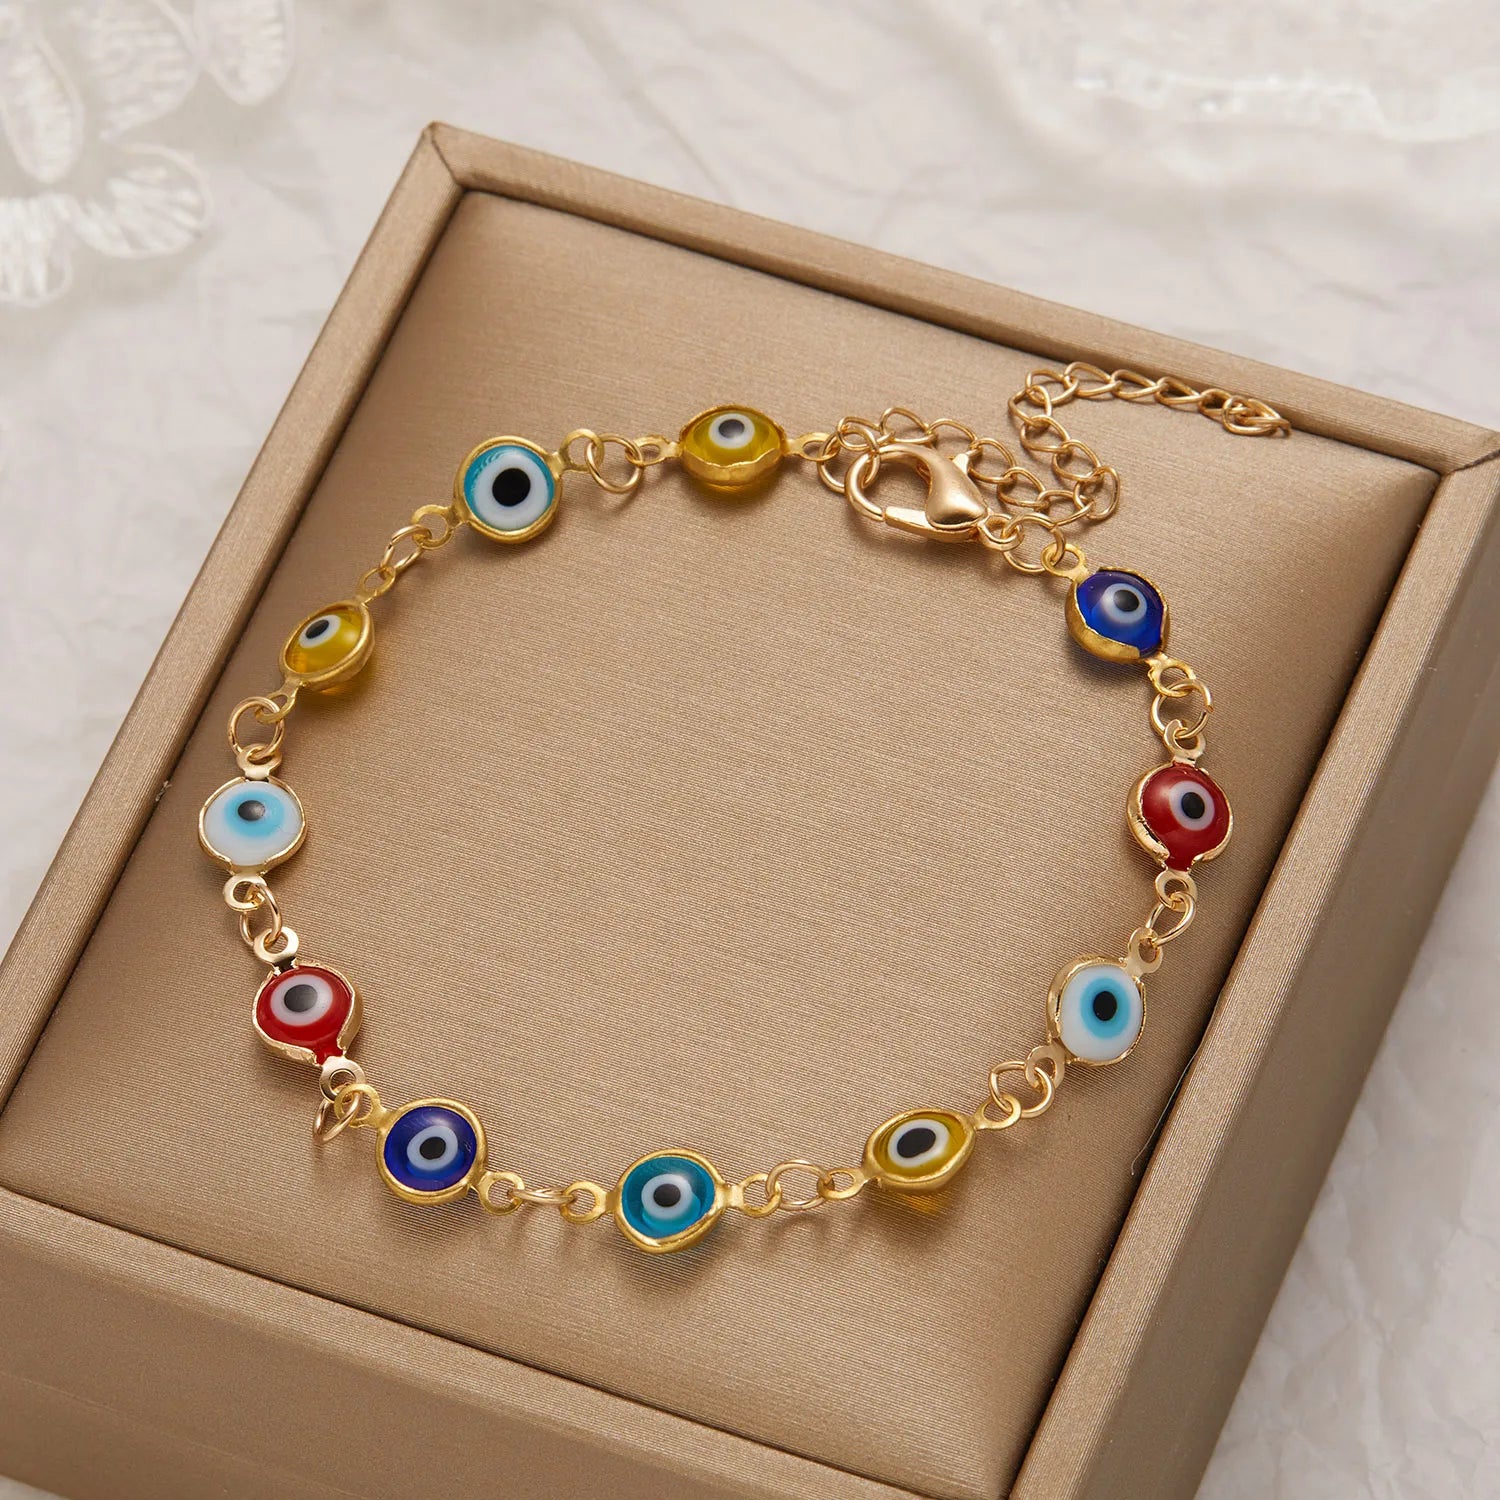 Evil Eye Bracelet For Women Men Lucky Turkey Colorful Red Blue Eye Adjustable Metal Chain Bangles Good Luck Wealth Jewelry Gifts Good Luck Charm